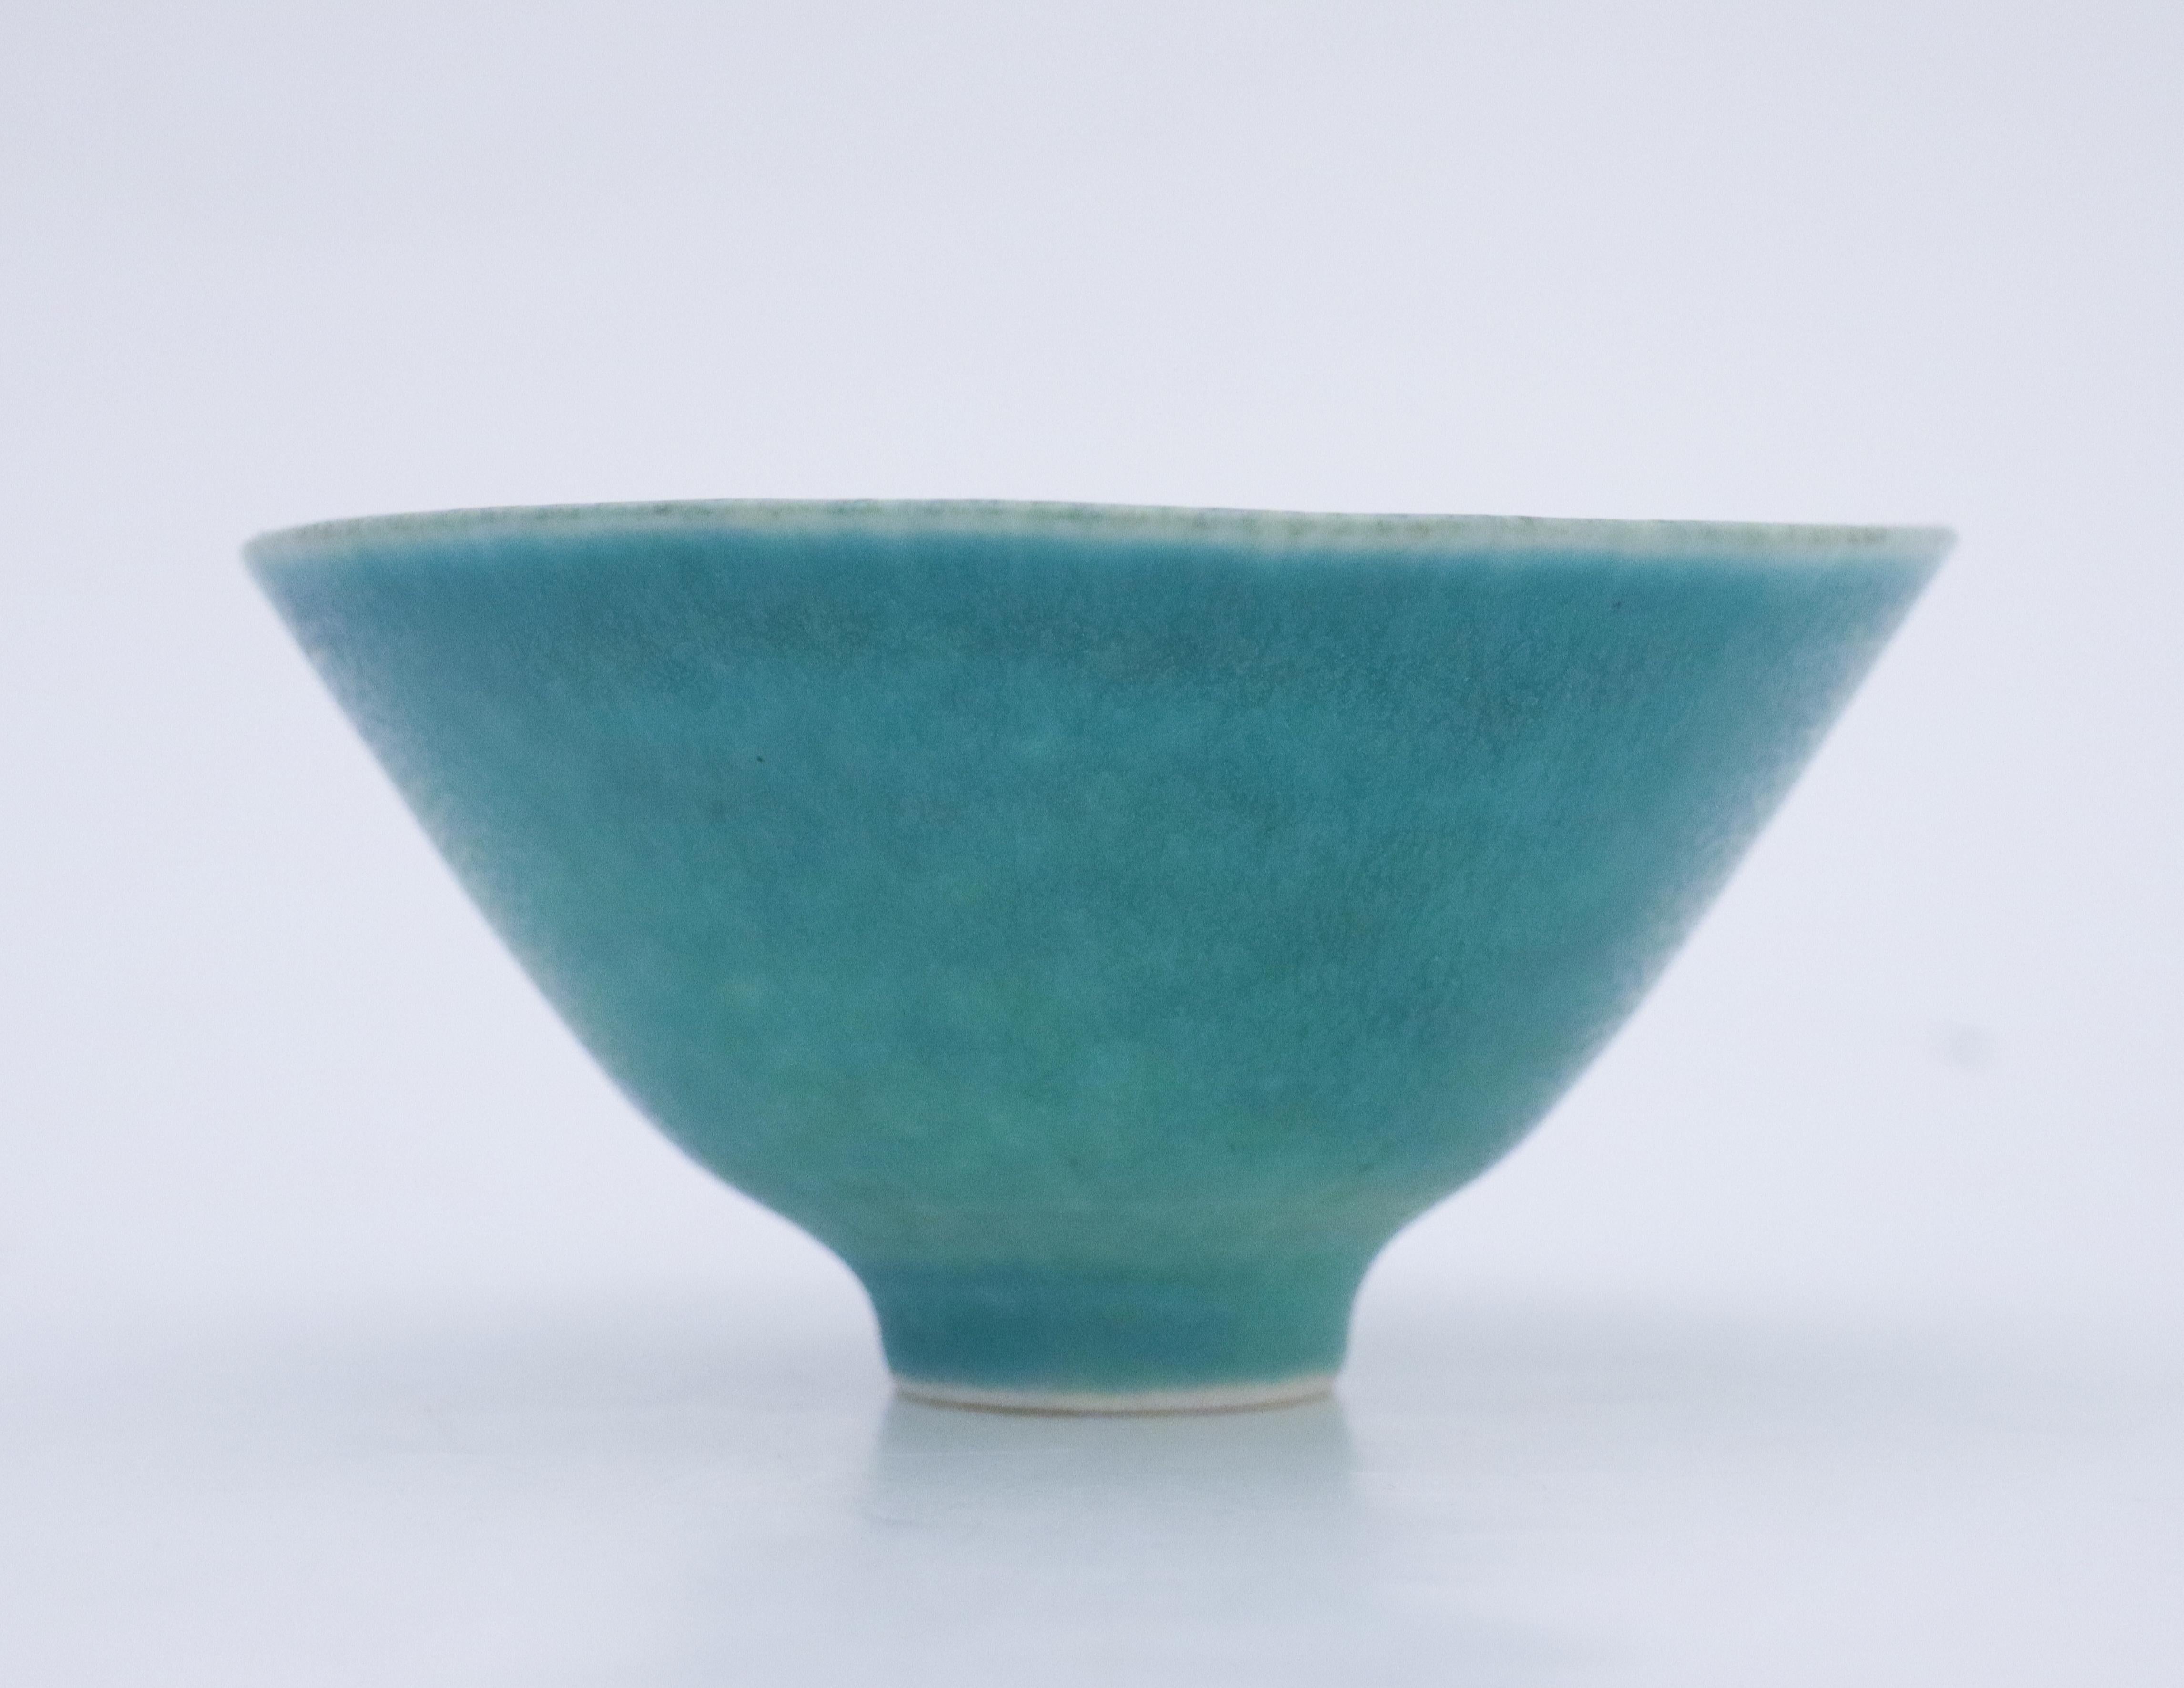 A lovely turquoise mid-century bowl in ceramic from Rörstrand, Sweden, designed by Carl-Harry Stålhane. The bowl is marked as 1st quality and in excellent condition. 

Carl-Harry Stålhane is one of the top names when it comes to Mid century